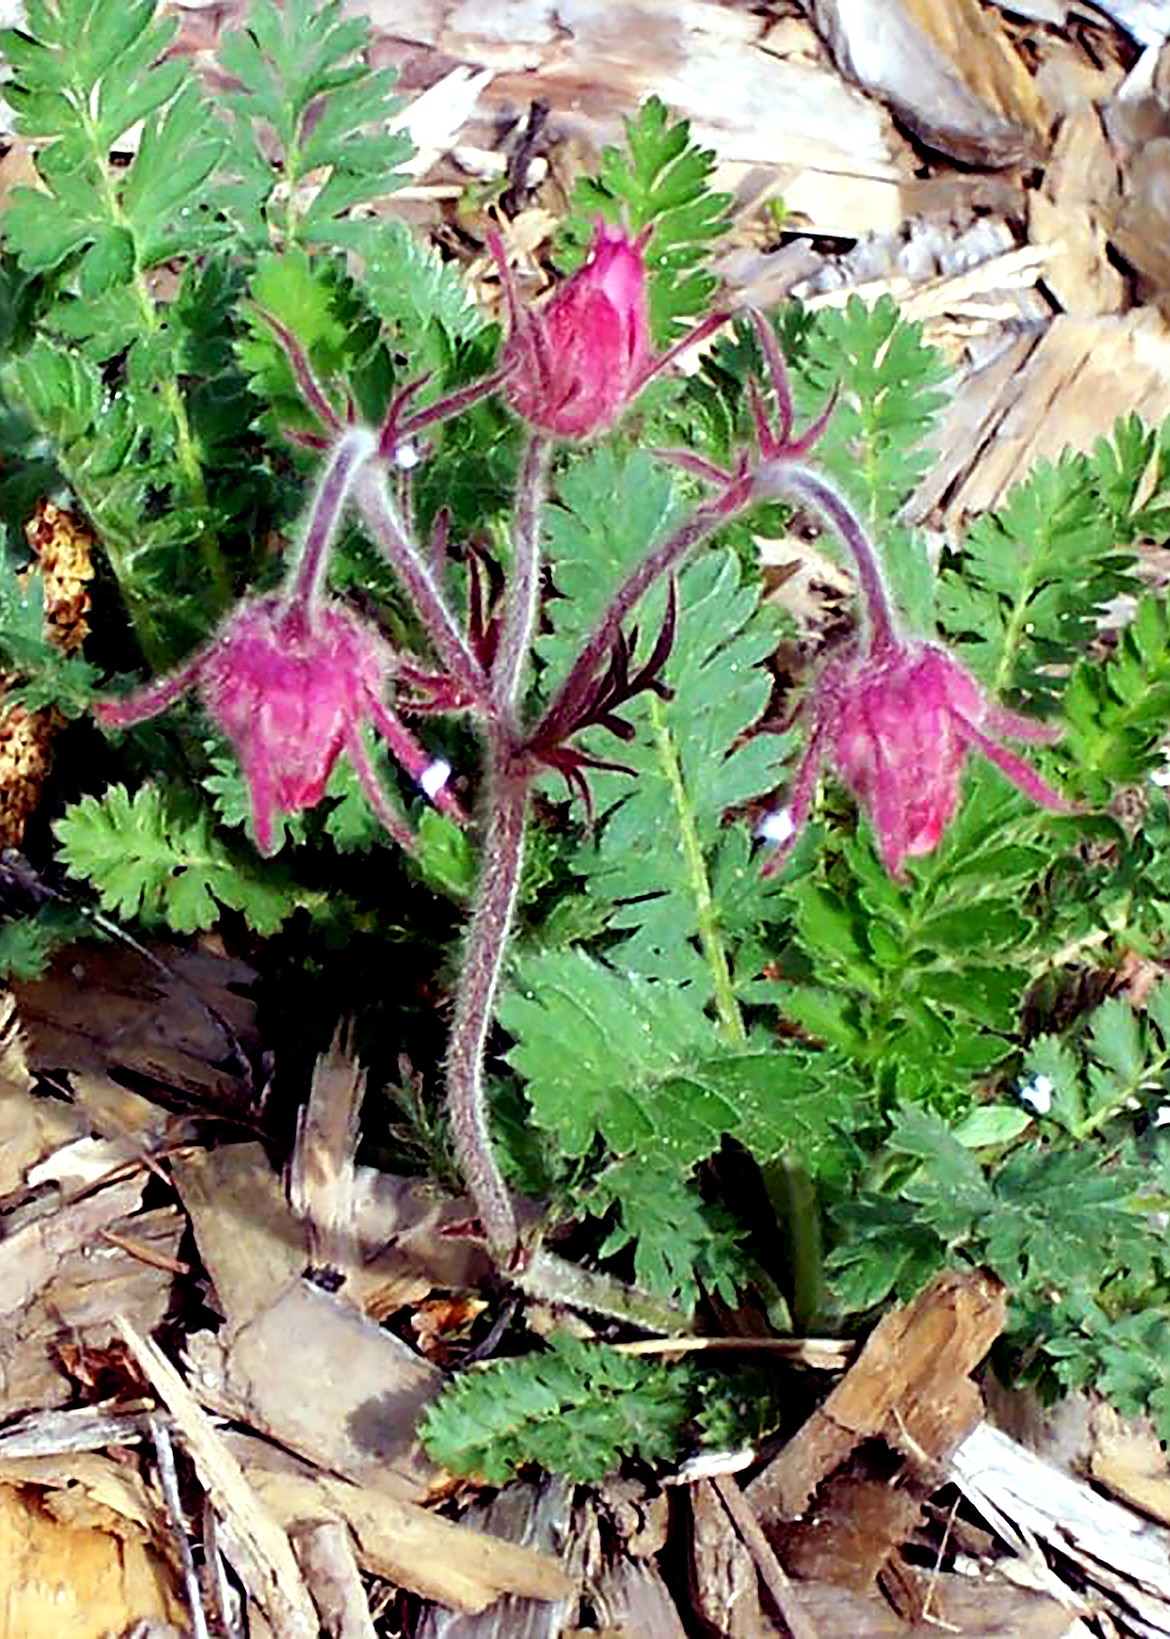 Once plentiful from coast to coast in the northern United States and southern Canada, Prairie Smoke is now rare in many areas due to development and competition from non-native invaders.\\